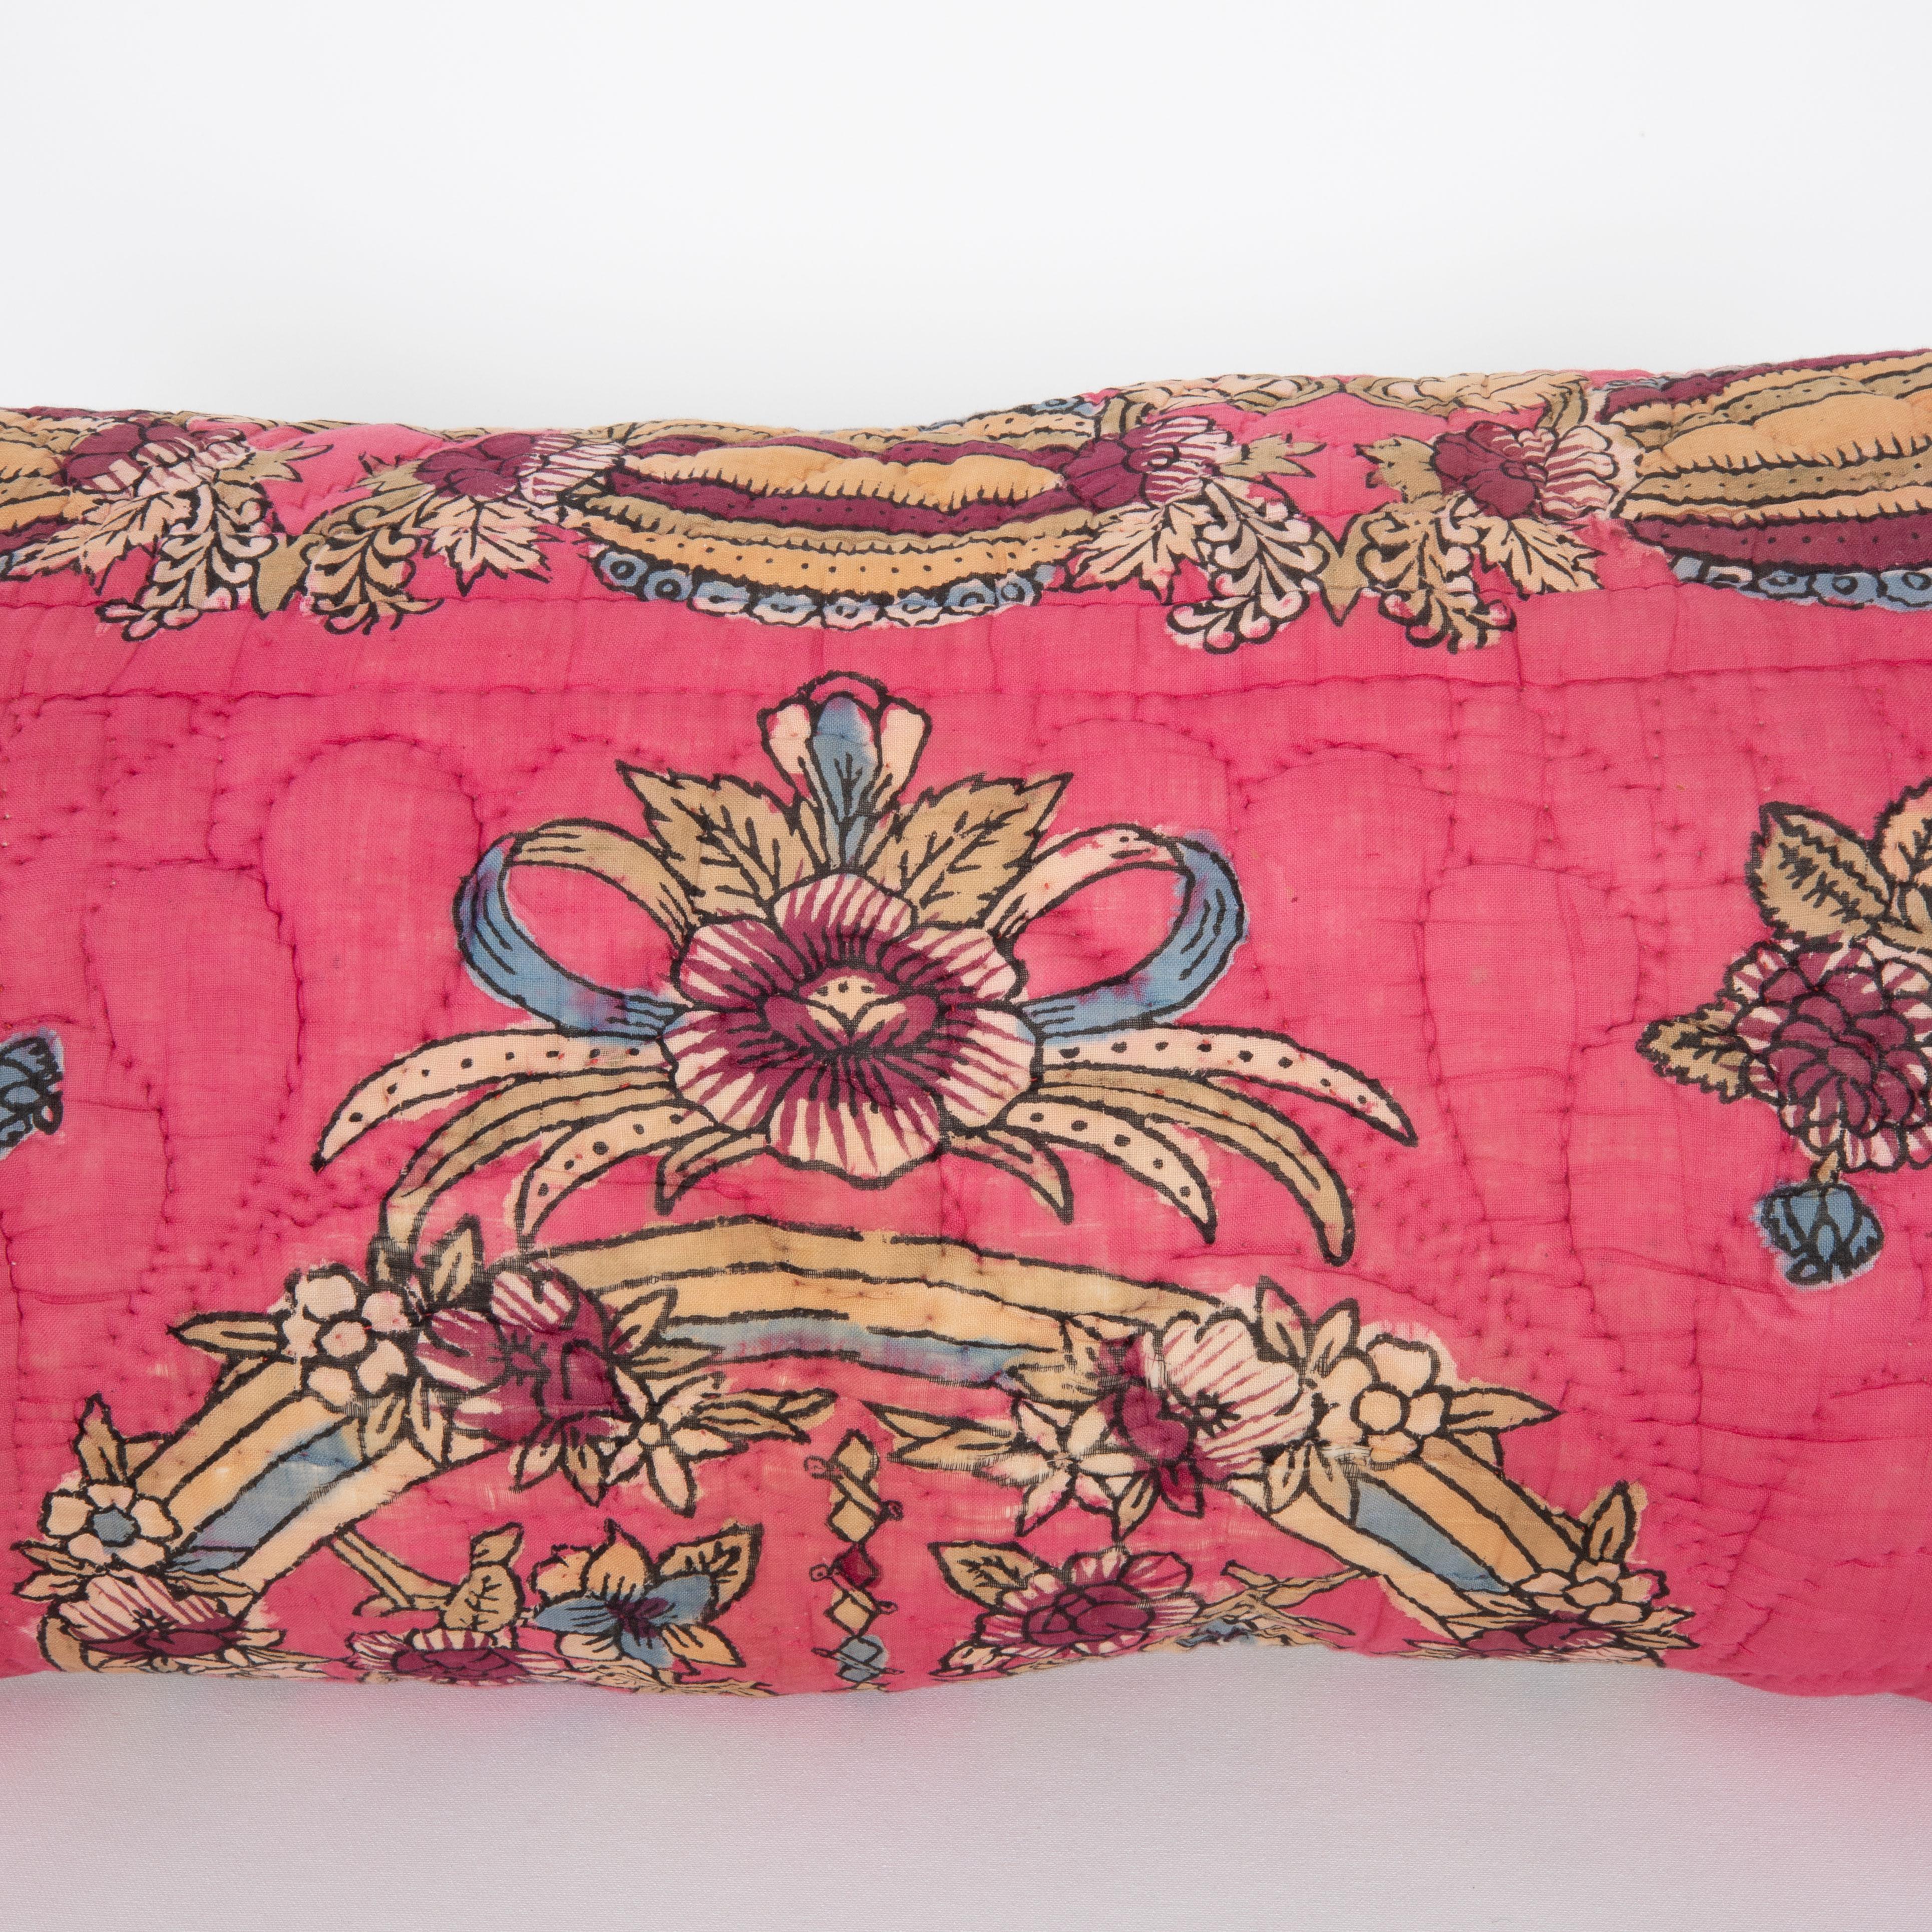 Quilted Pillow Case Made From Mid 20th C. Anatolian Quilt For Sale